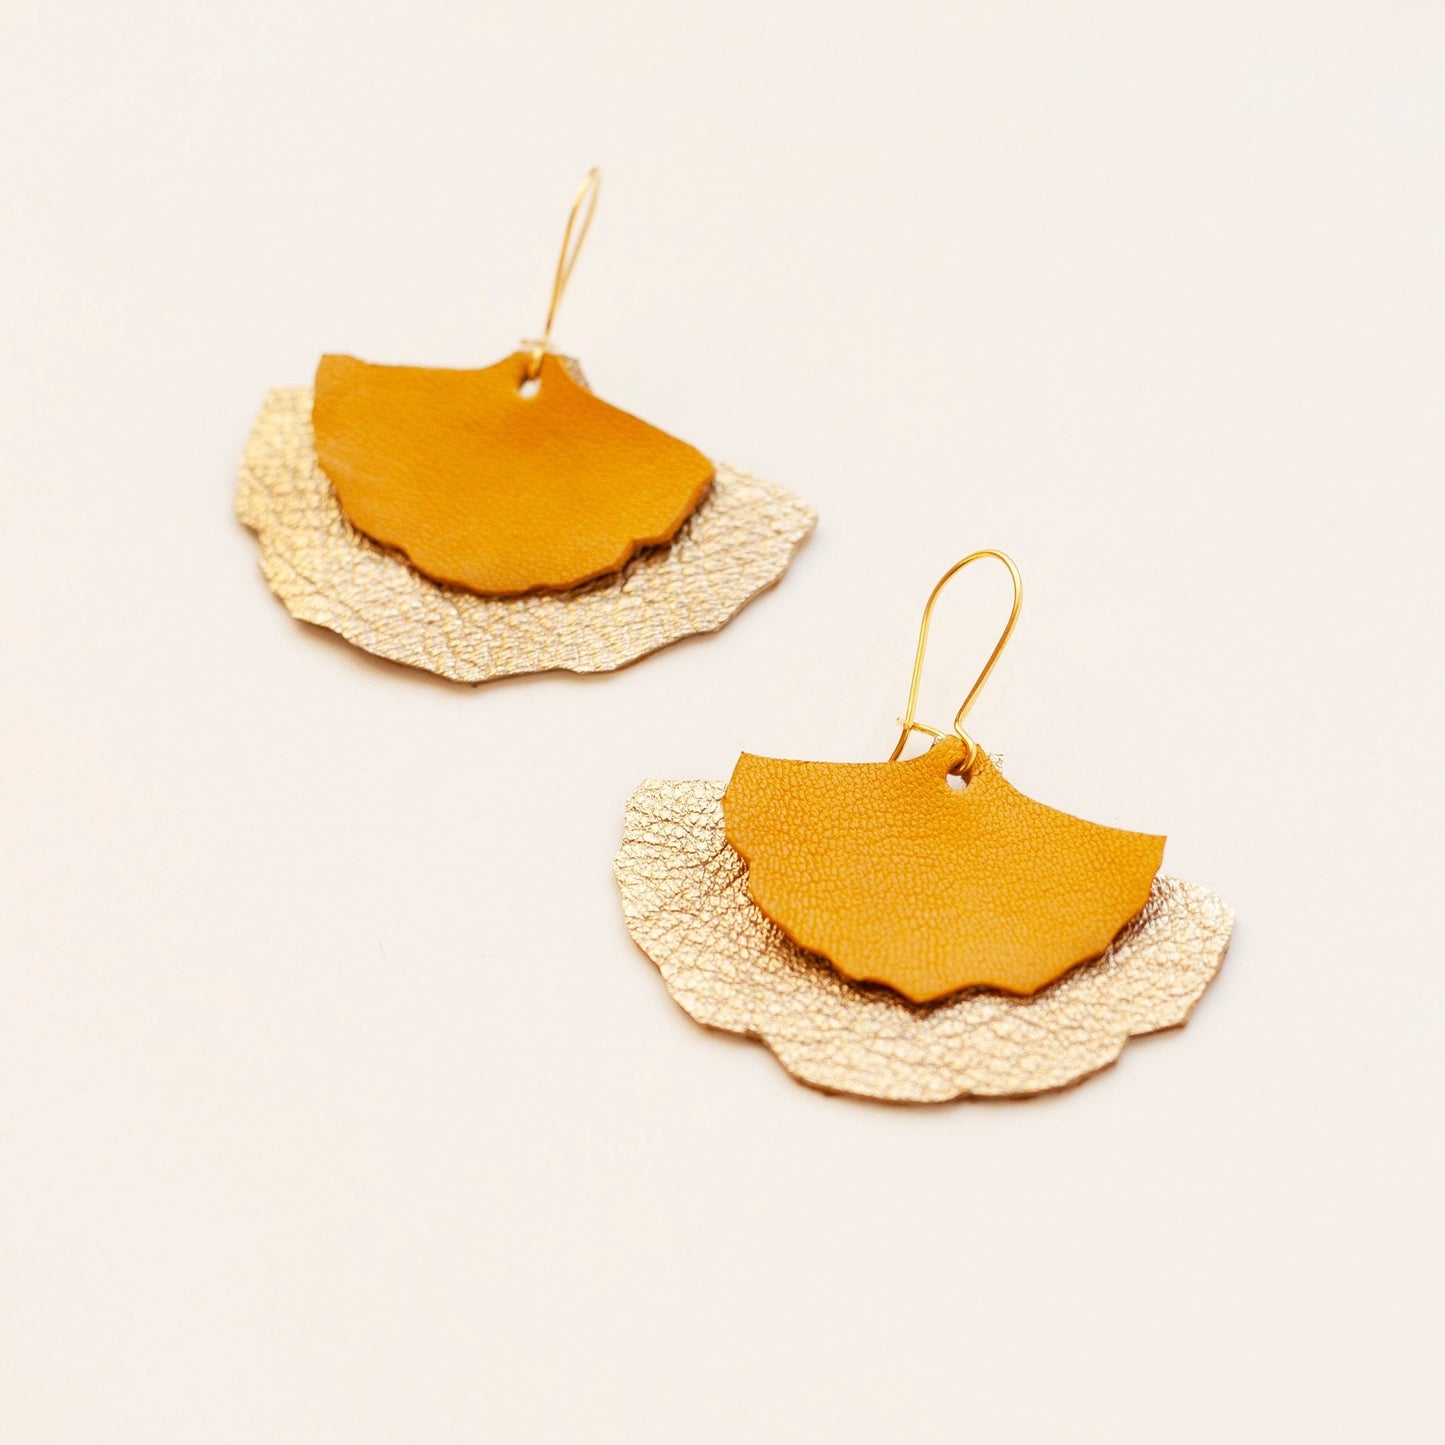 Ginkgo leaf earrings in gold and mustard yellow leather